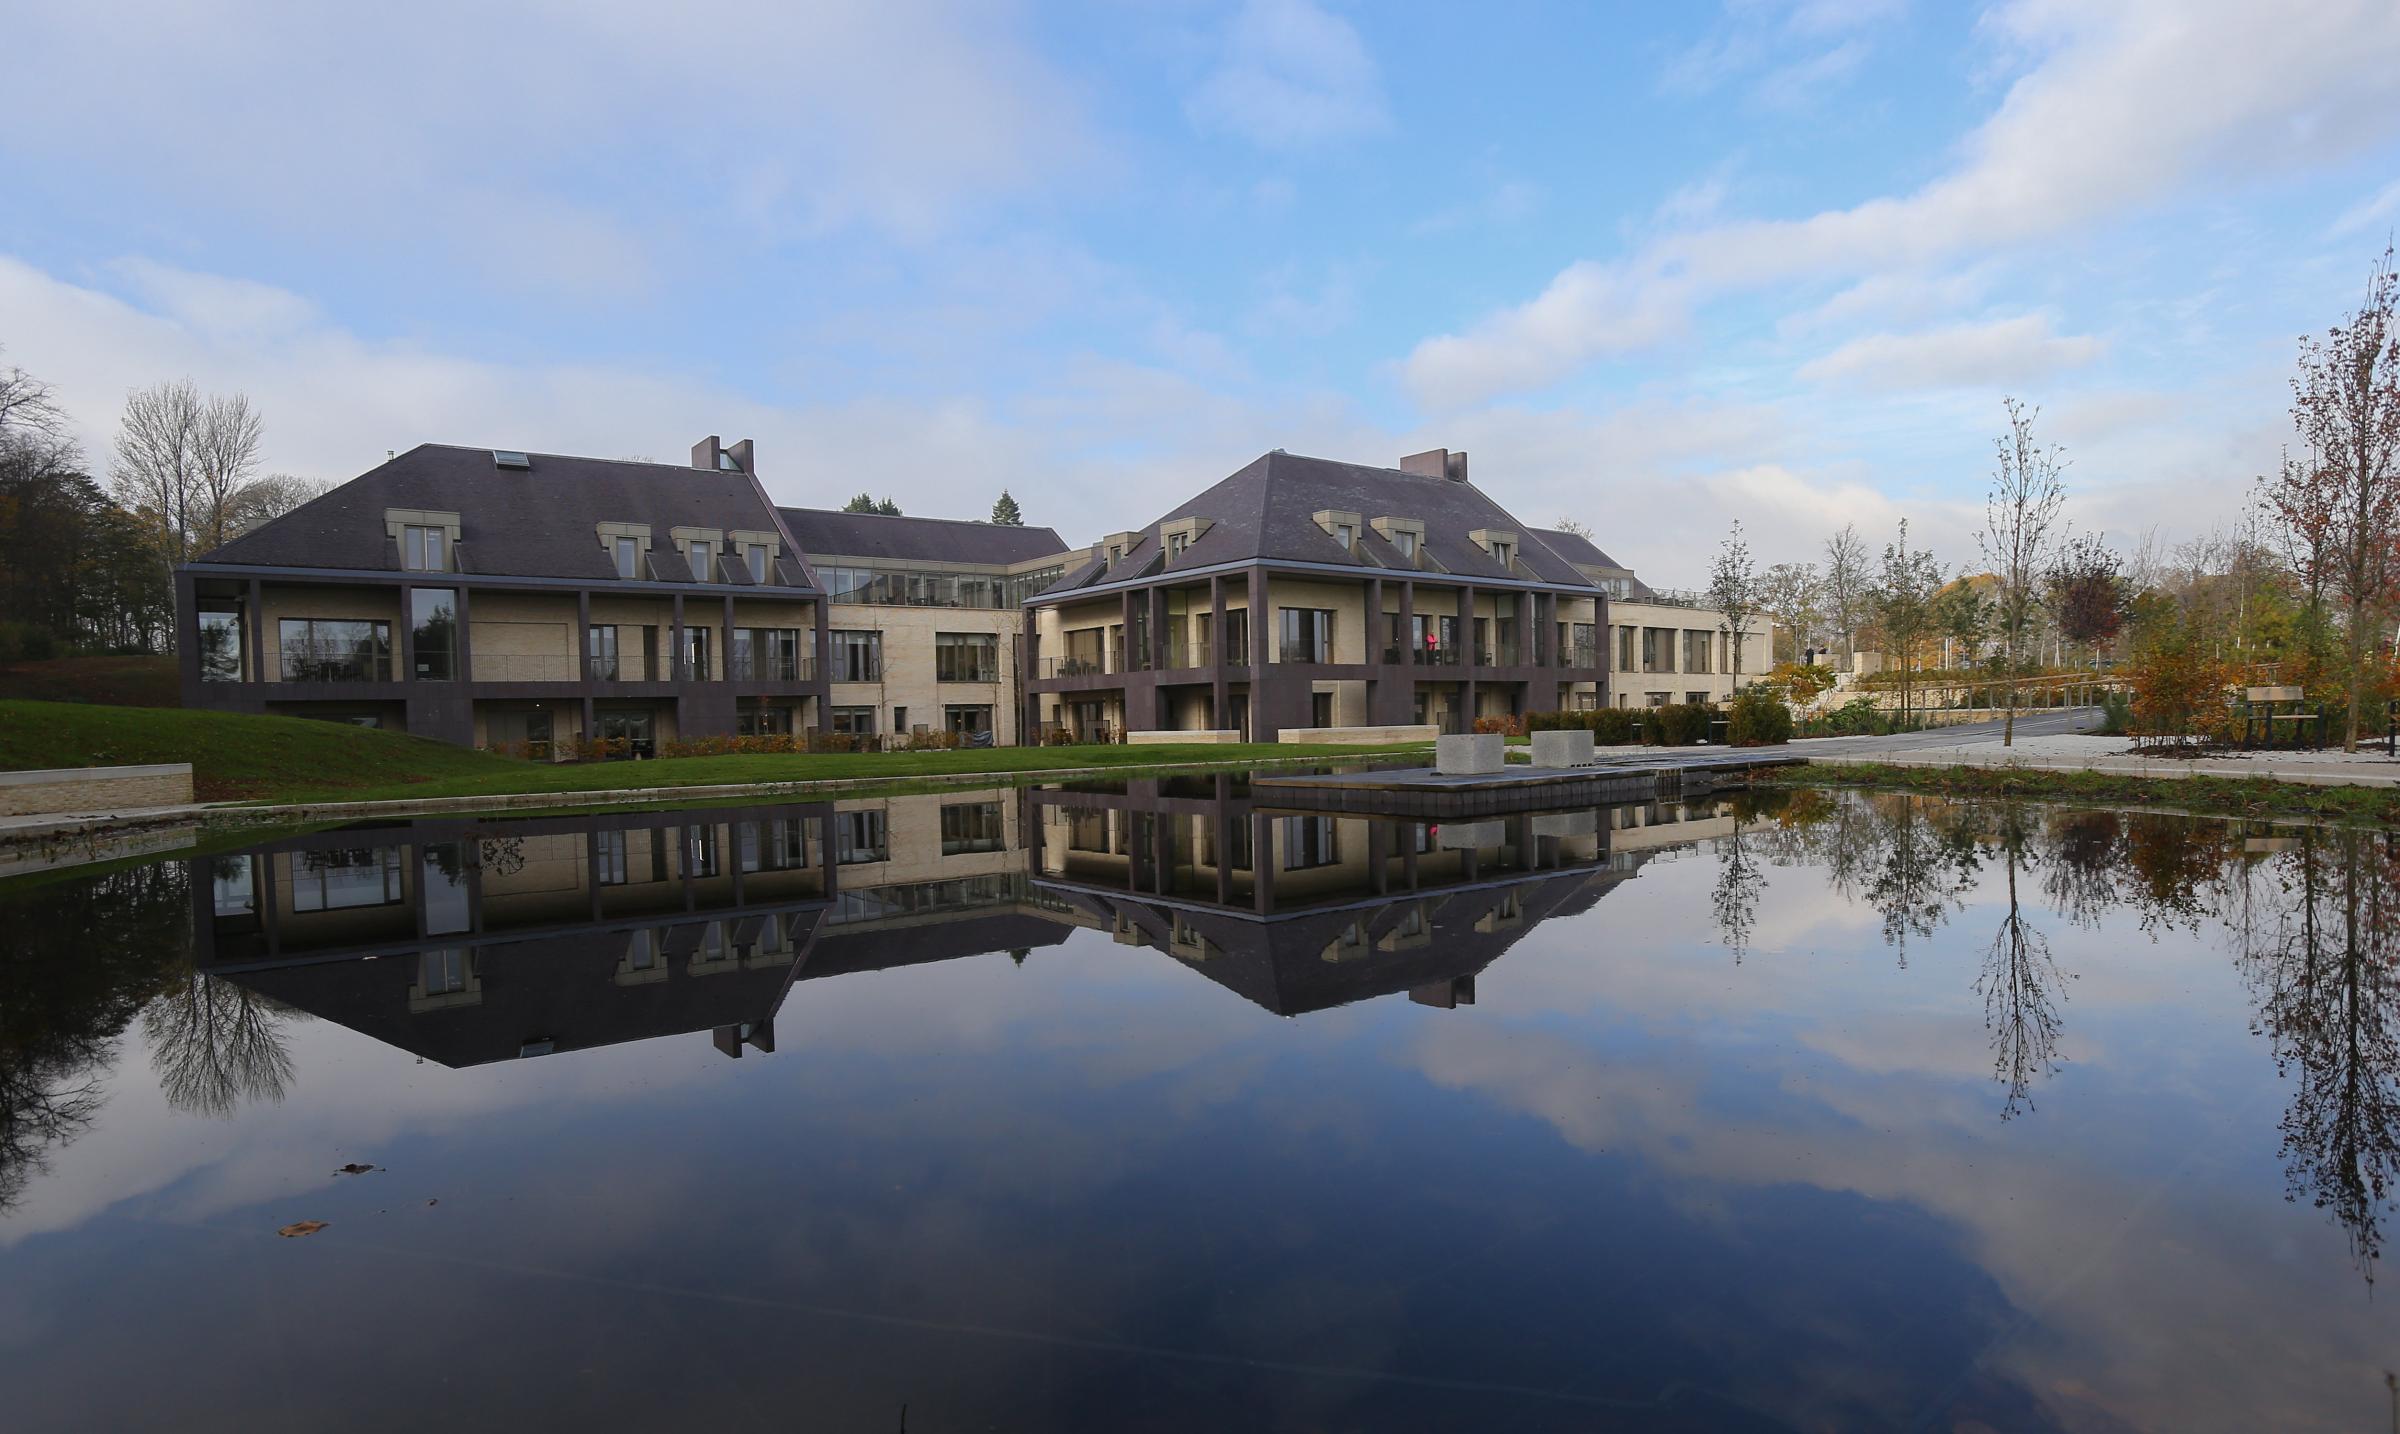 Official opening of the new Prince & Princess of Wales Hospice at Bellahouston Park in 2018.